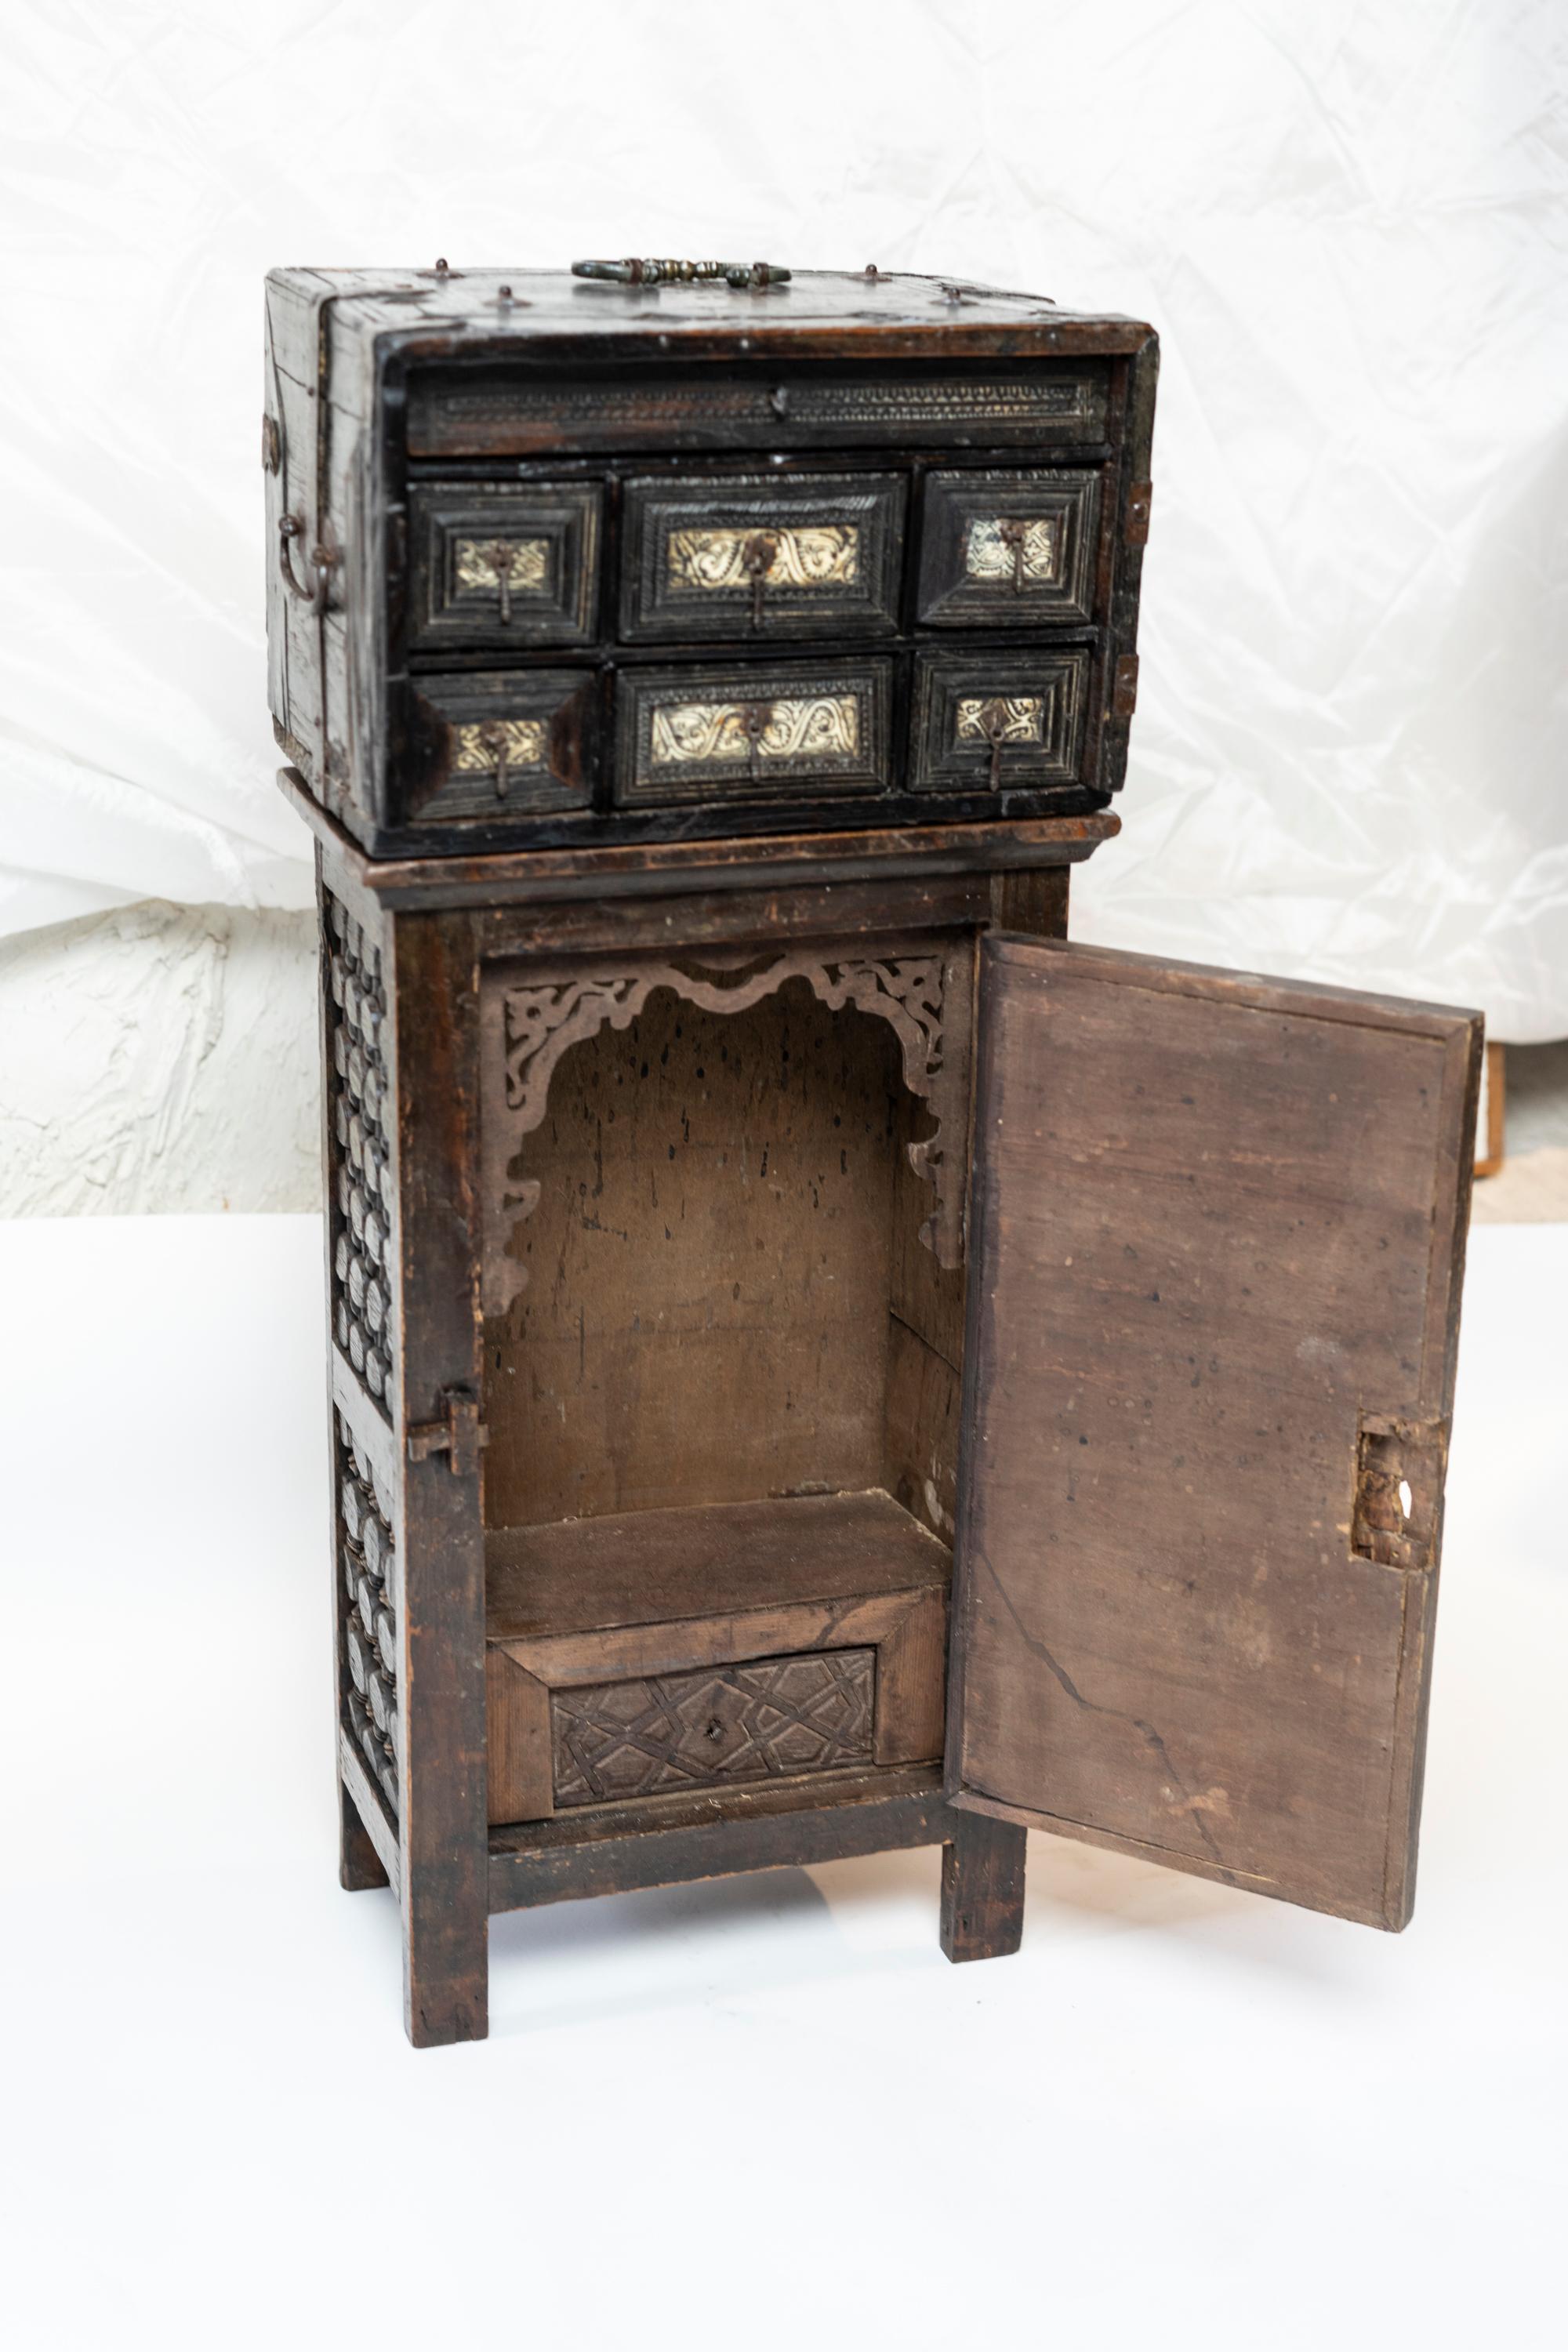 Rare diminutive Hispano Mauresque vargueno cabinet inlaid with bone and the interior fitted with forged iron hardware missing fall front panel, beautiful antique weathered patina. Together with later cabinet stand.